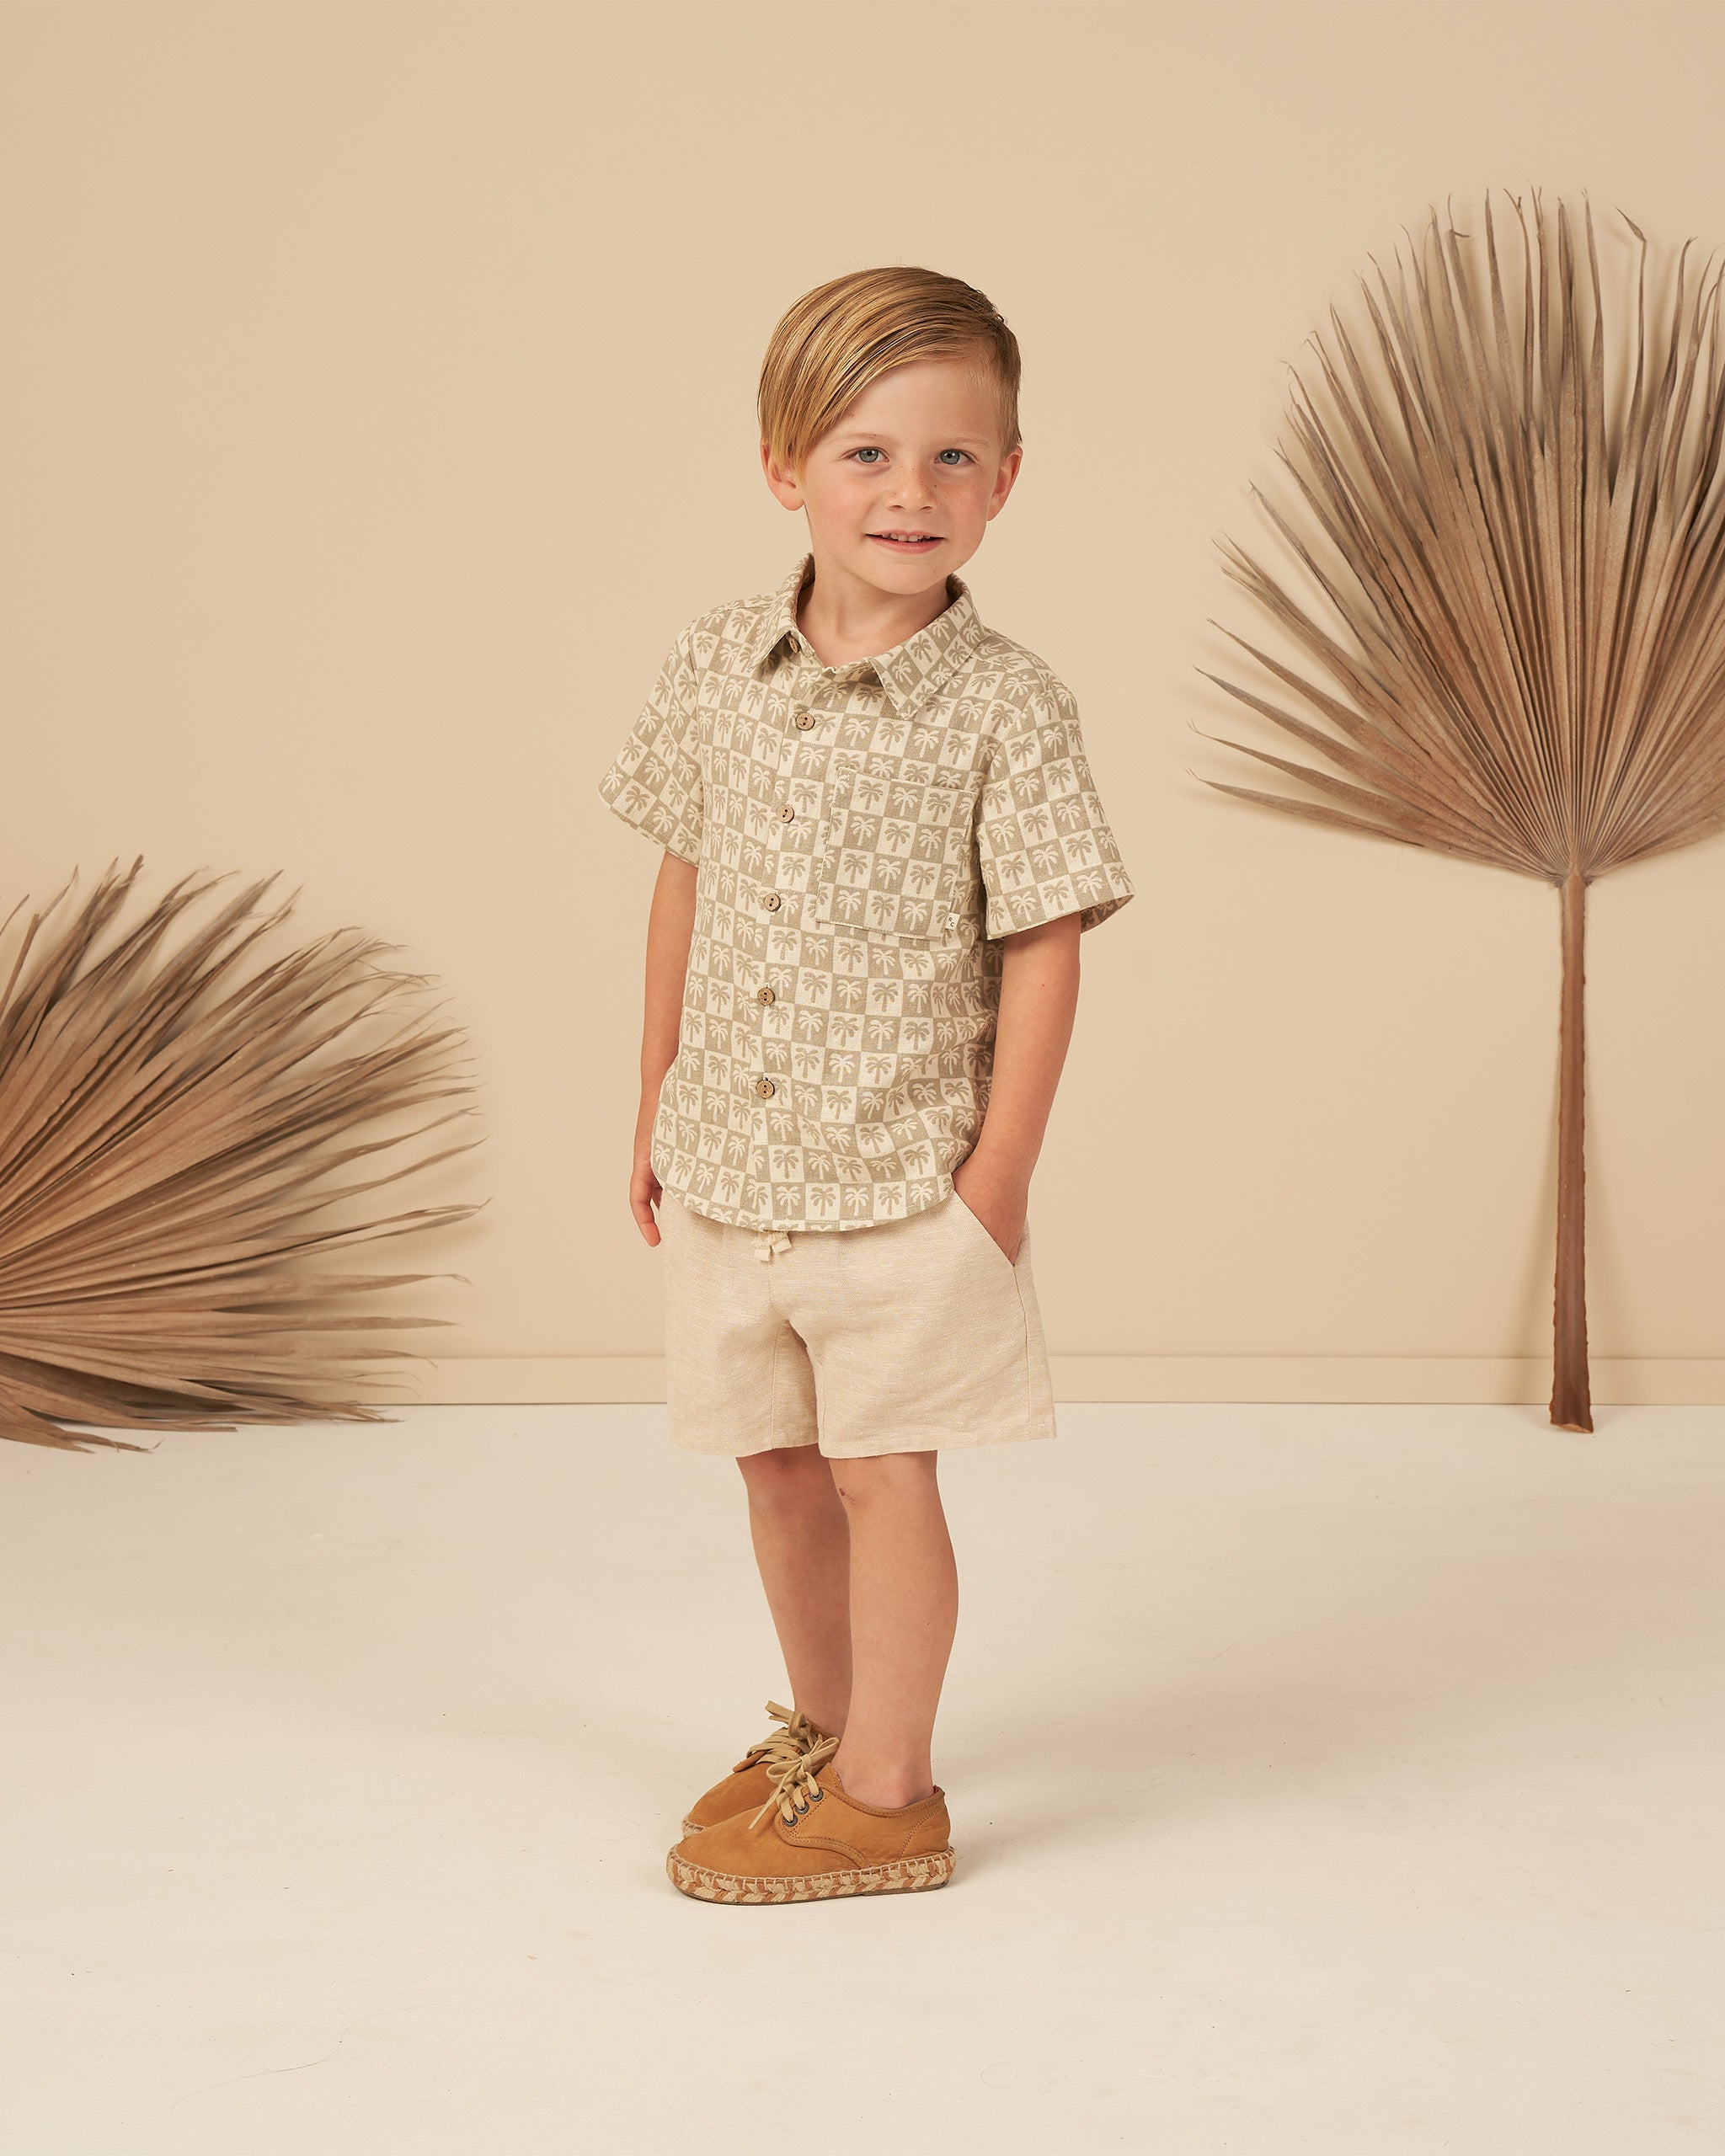 Bermuda Short || Heathered Sand - Rylee + Cru | Kids Clothes | Trendy Baby Clothes | Modern Infant Outfits |